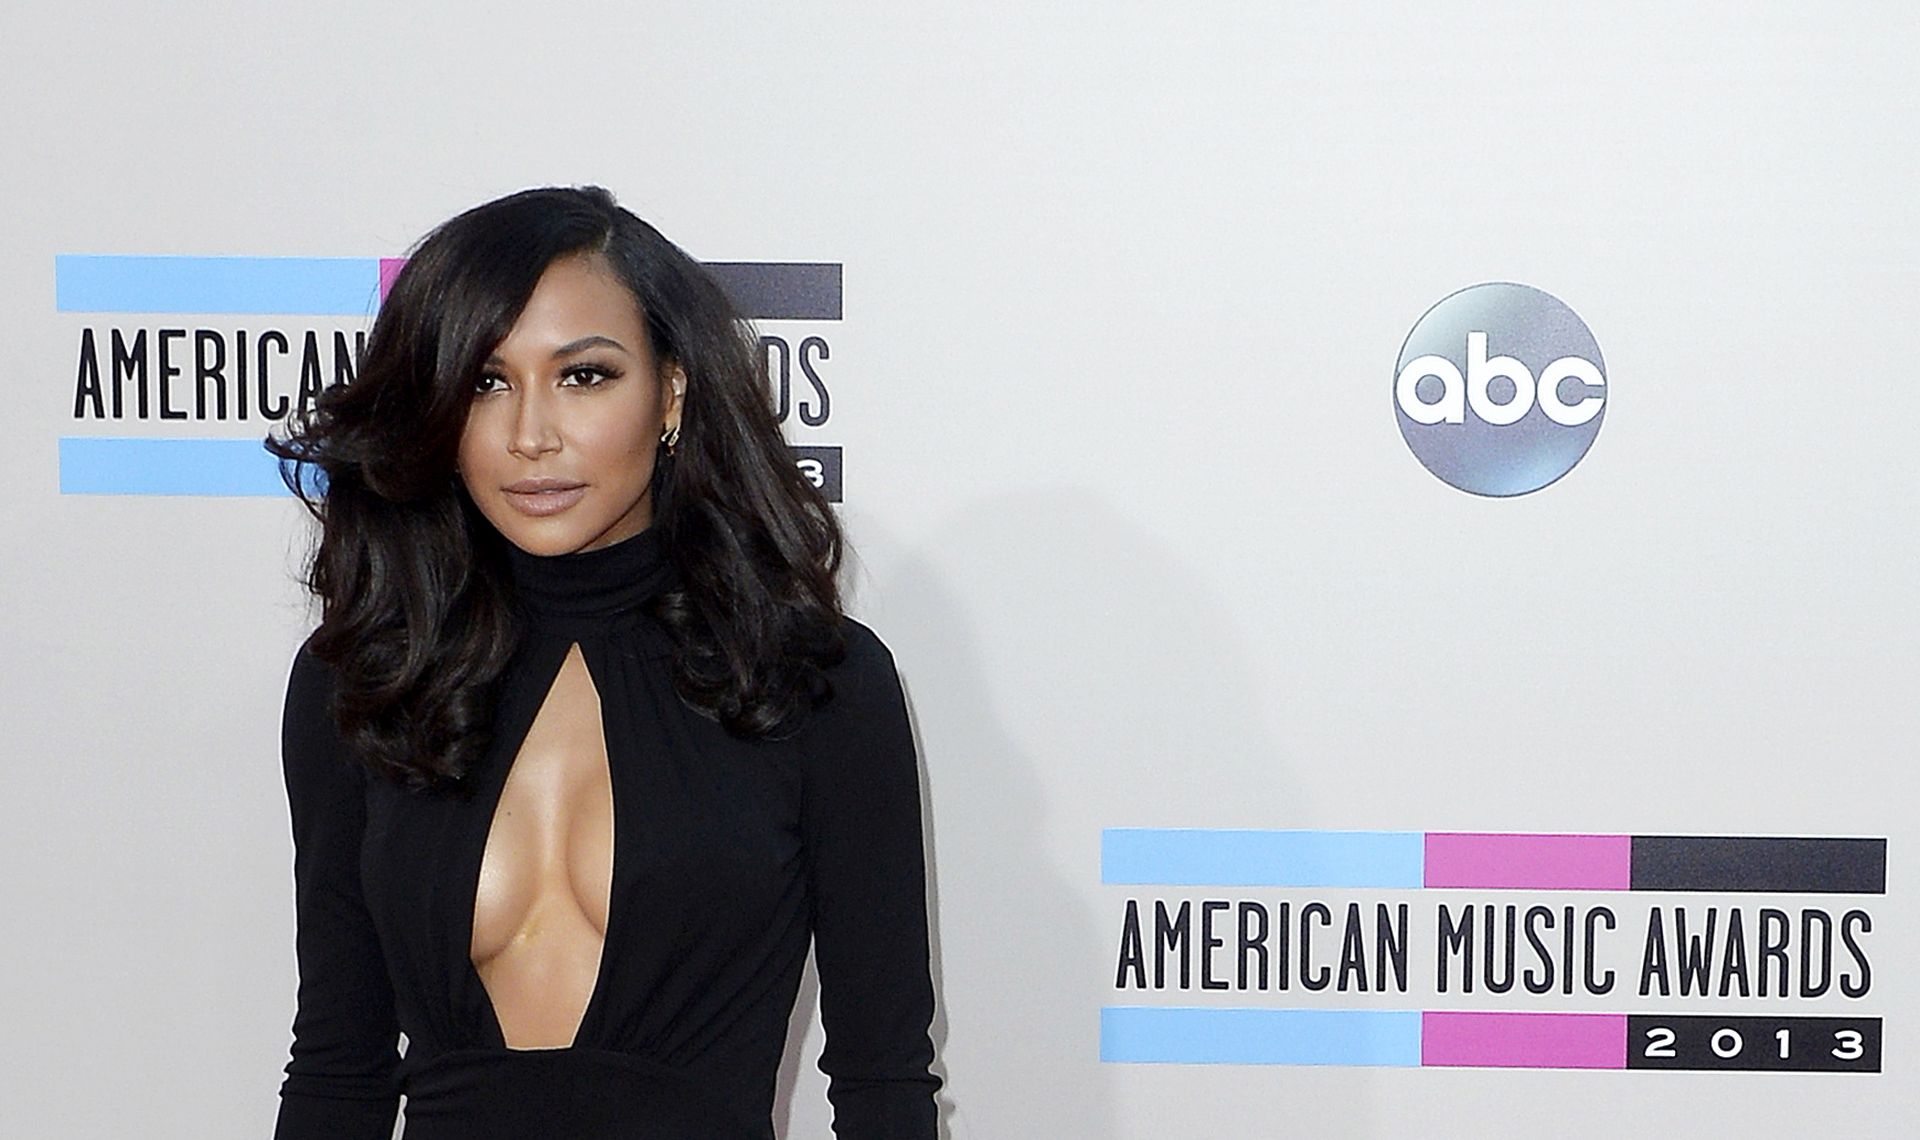 epa08536028 (FILE) - US actress and singer Naya Rivera arrives for the 41st American Music Awards held at the Nokia Theatre in Los Angeles, California, USA, 24 November 2013 (reissued 09 July 2020). Naya Rivera, 33, who portrayed the character of Santana Lopez in Glee, went missing on 08 July 2020 while on a boating trip in Lake Piru in California with her 4 year old son, who was later found alone sleeping in the boat. Ventura County Sheriff’s Office said that it was searching for a “possible drowning victim” in the lake.  EPA/PAUL BUCK *** Local Caption *** 51117440